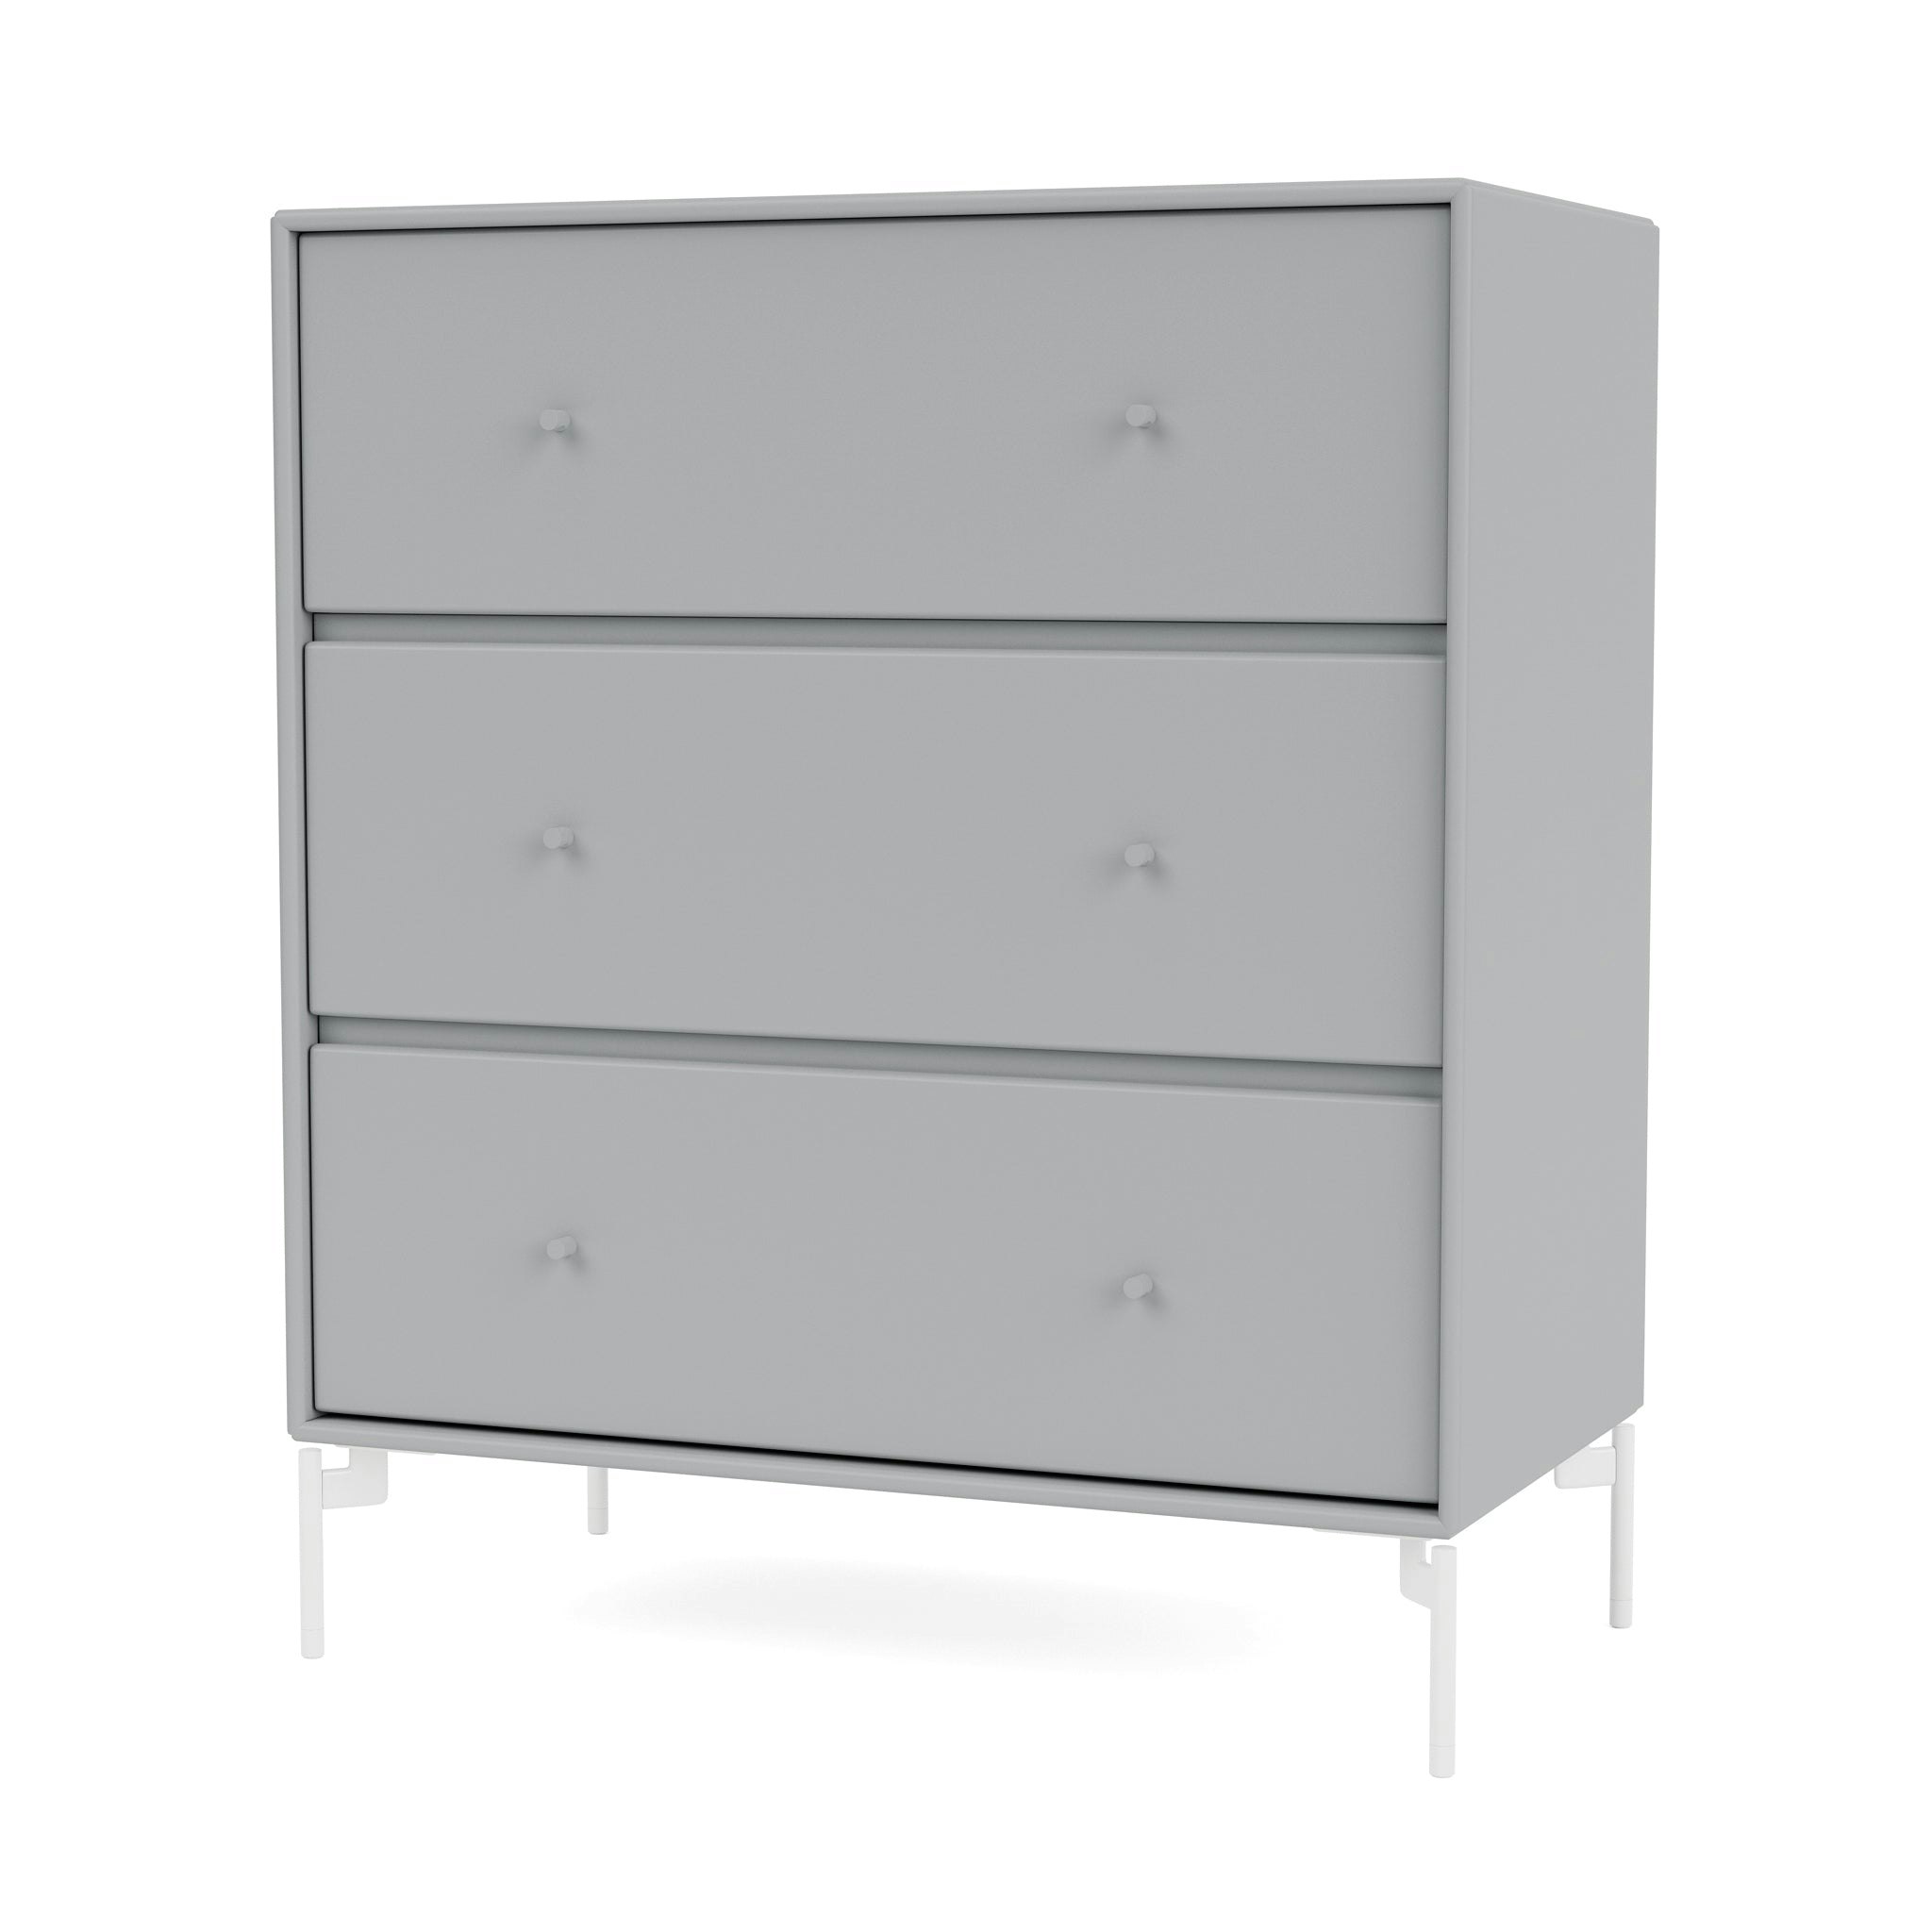 Carry Chest of Drawers by Montana Furniture